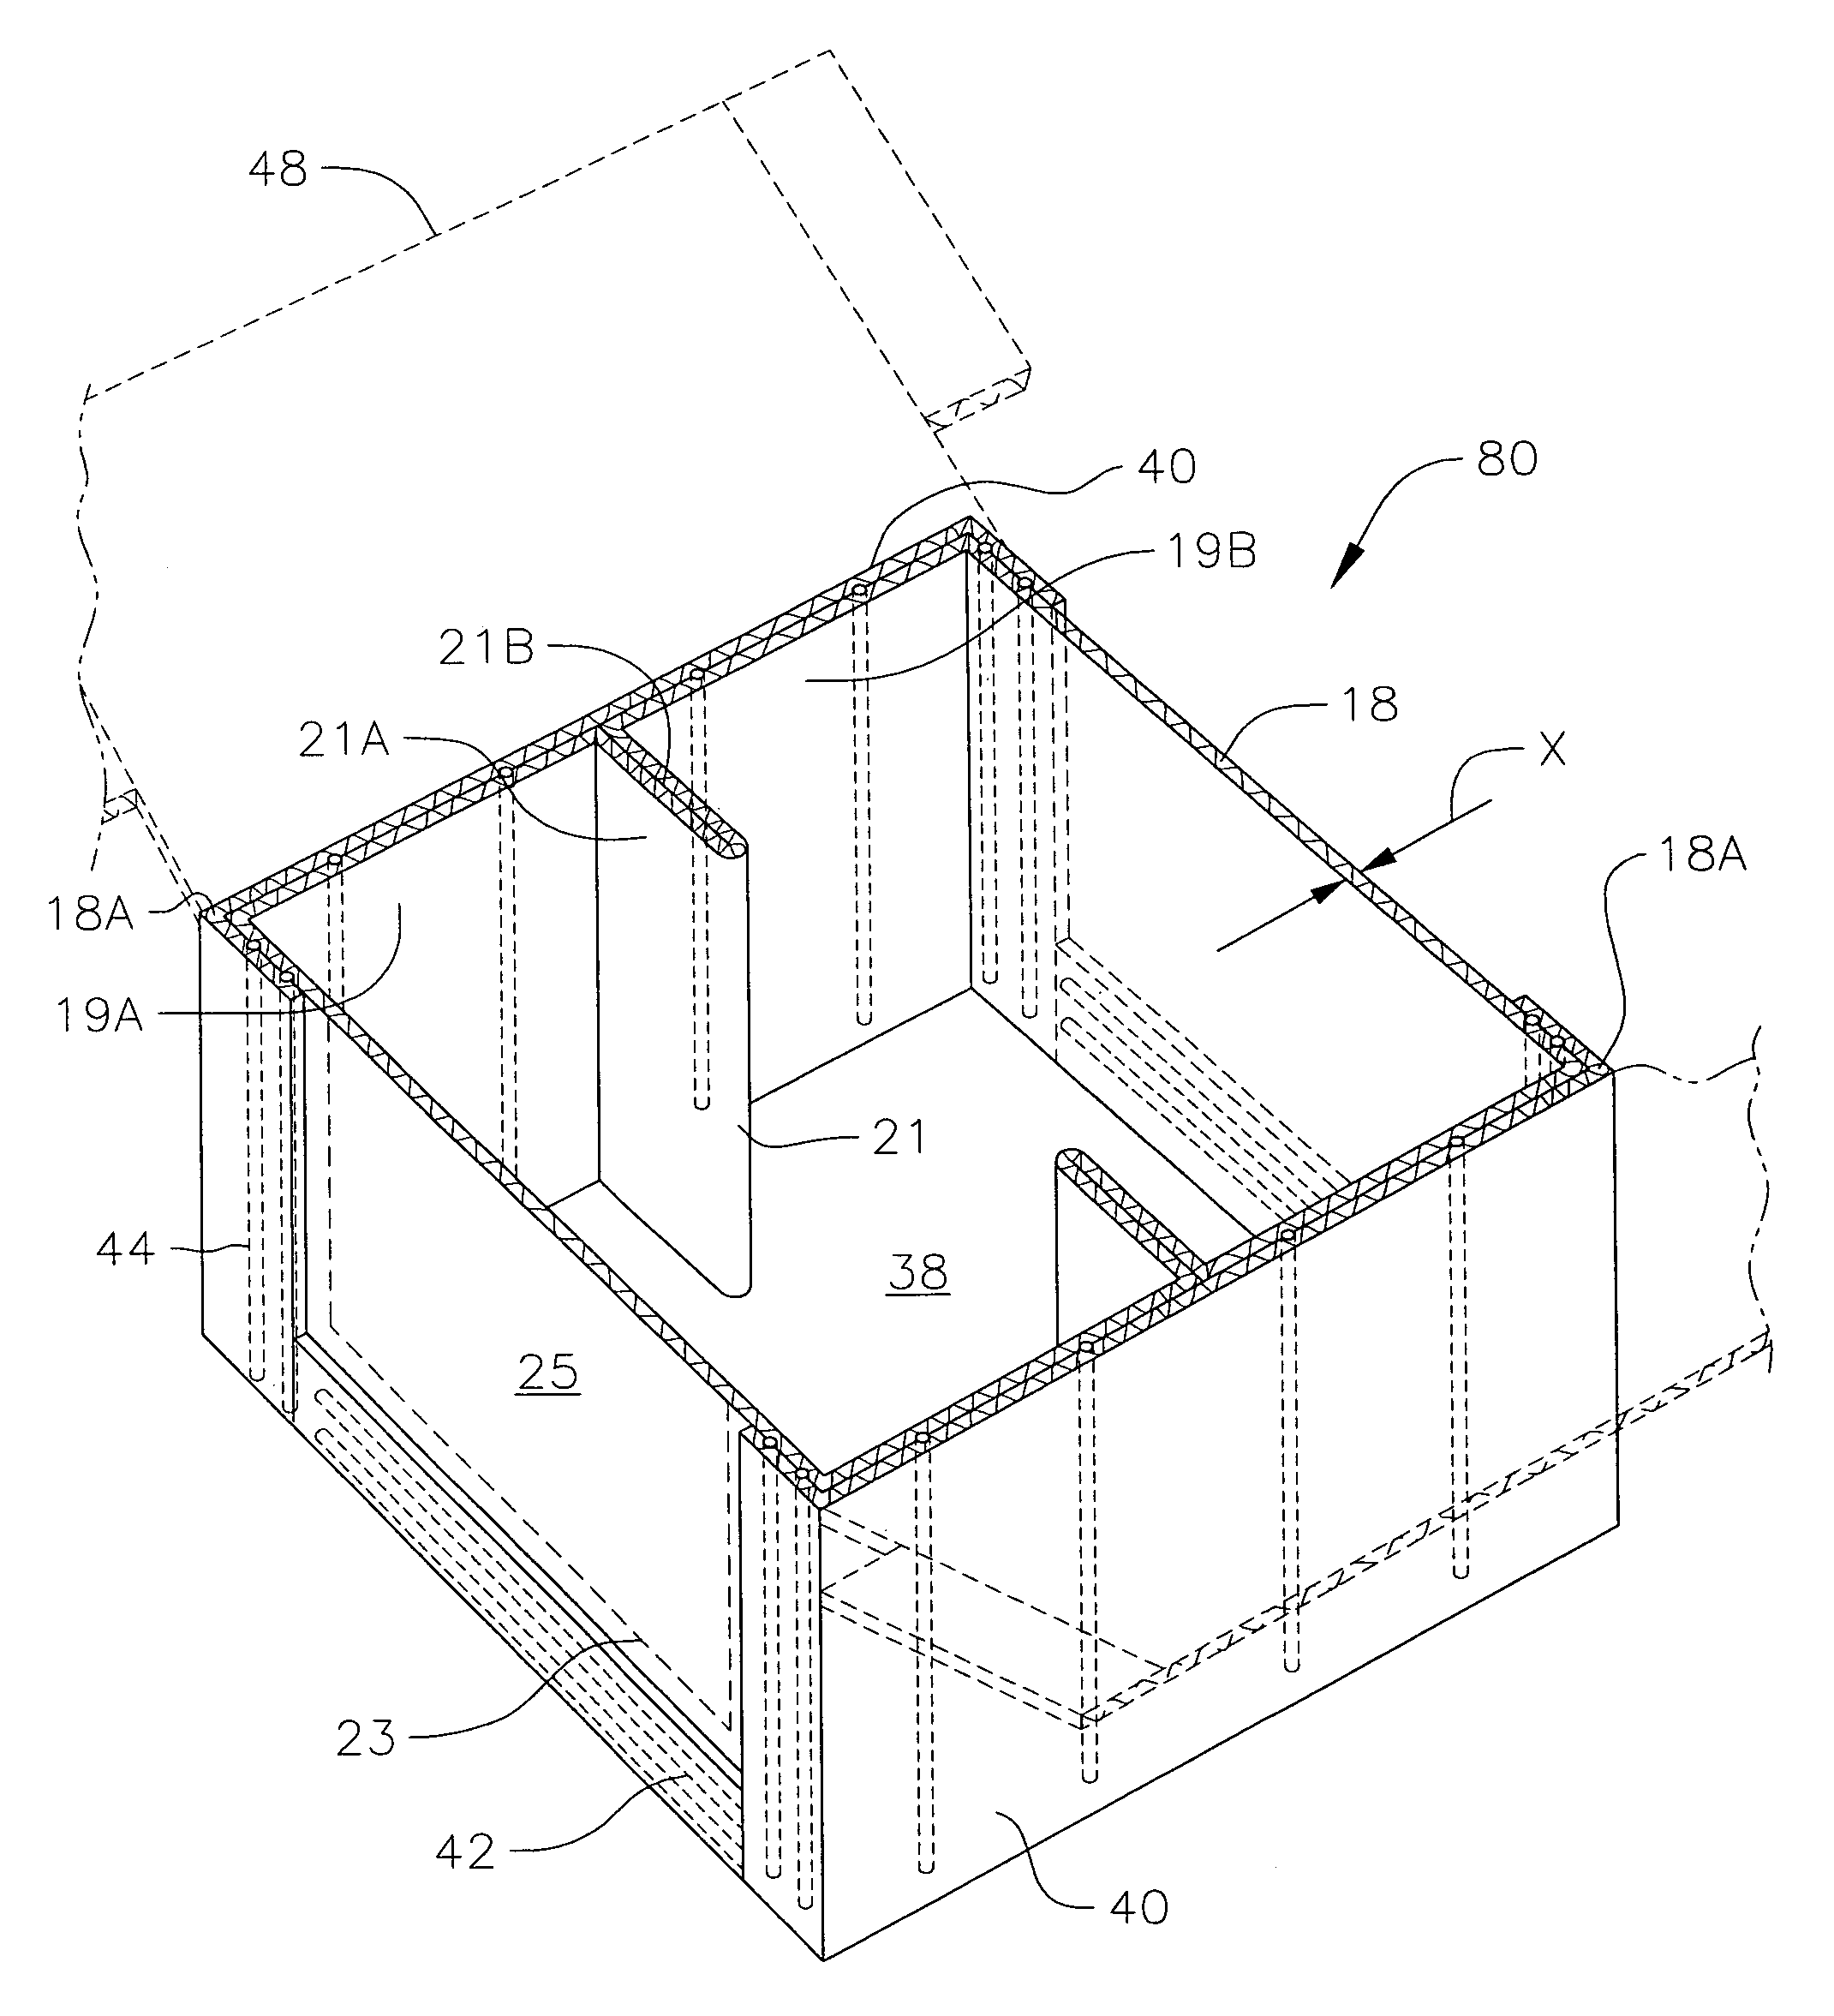 Shipping container and method of manufacturing same